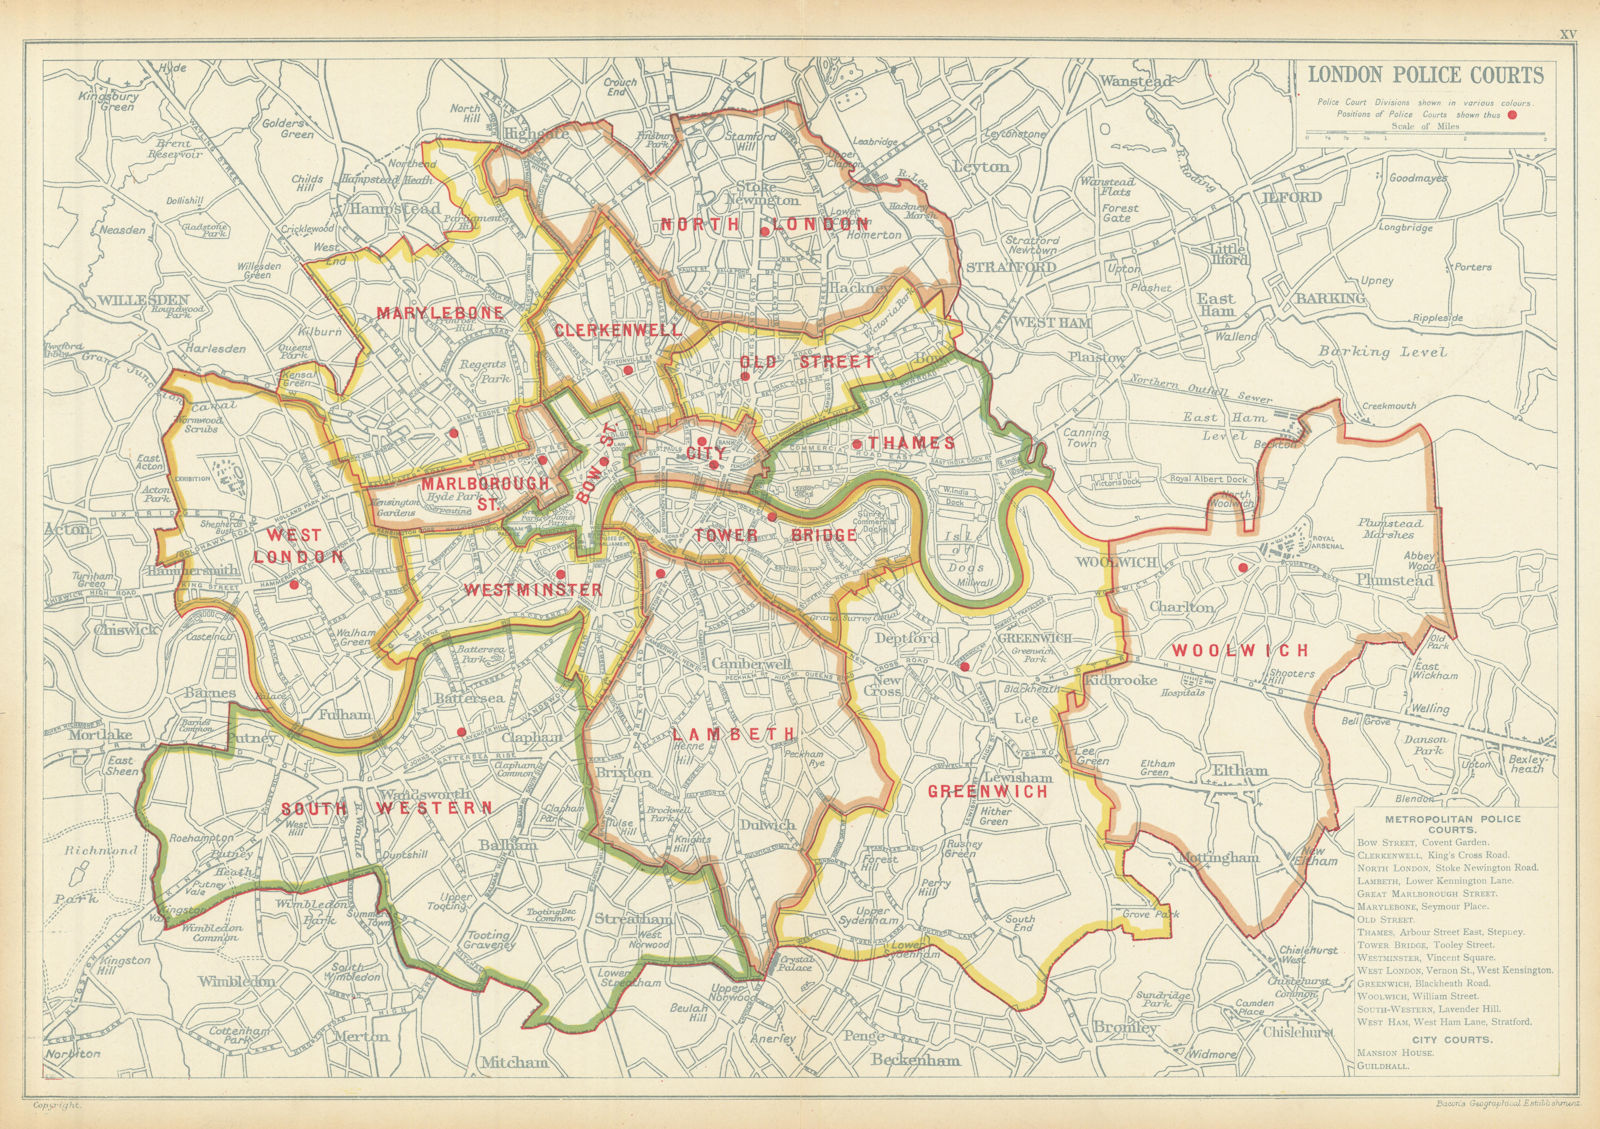 LONDON POLICE COURTS. Showing divisions & court locations. BACON 1913 old map